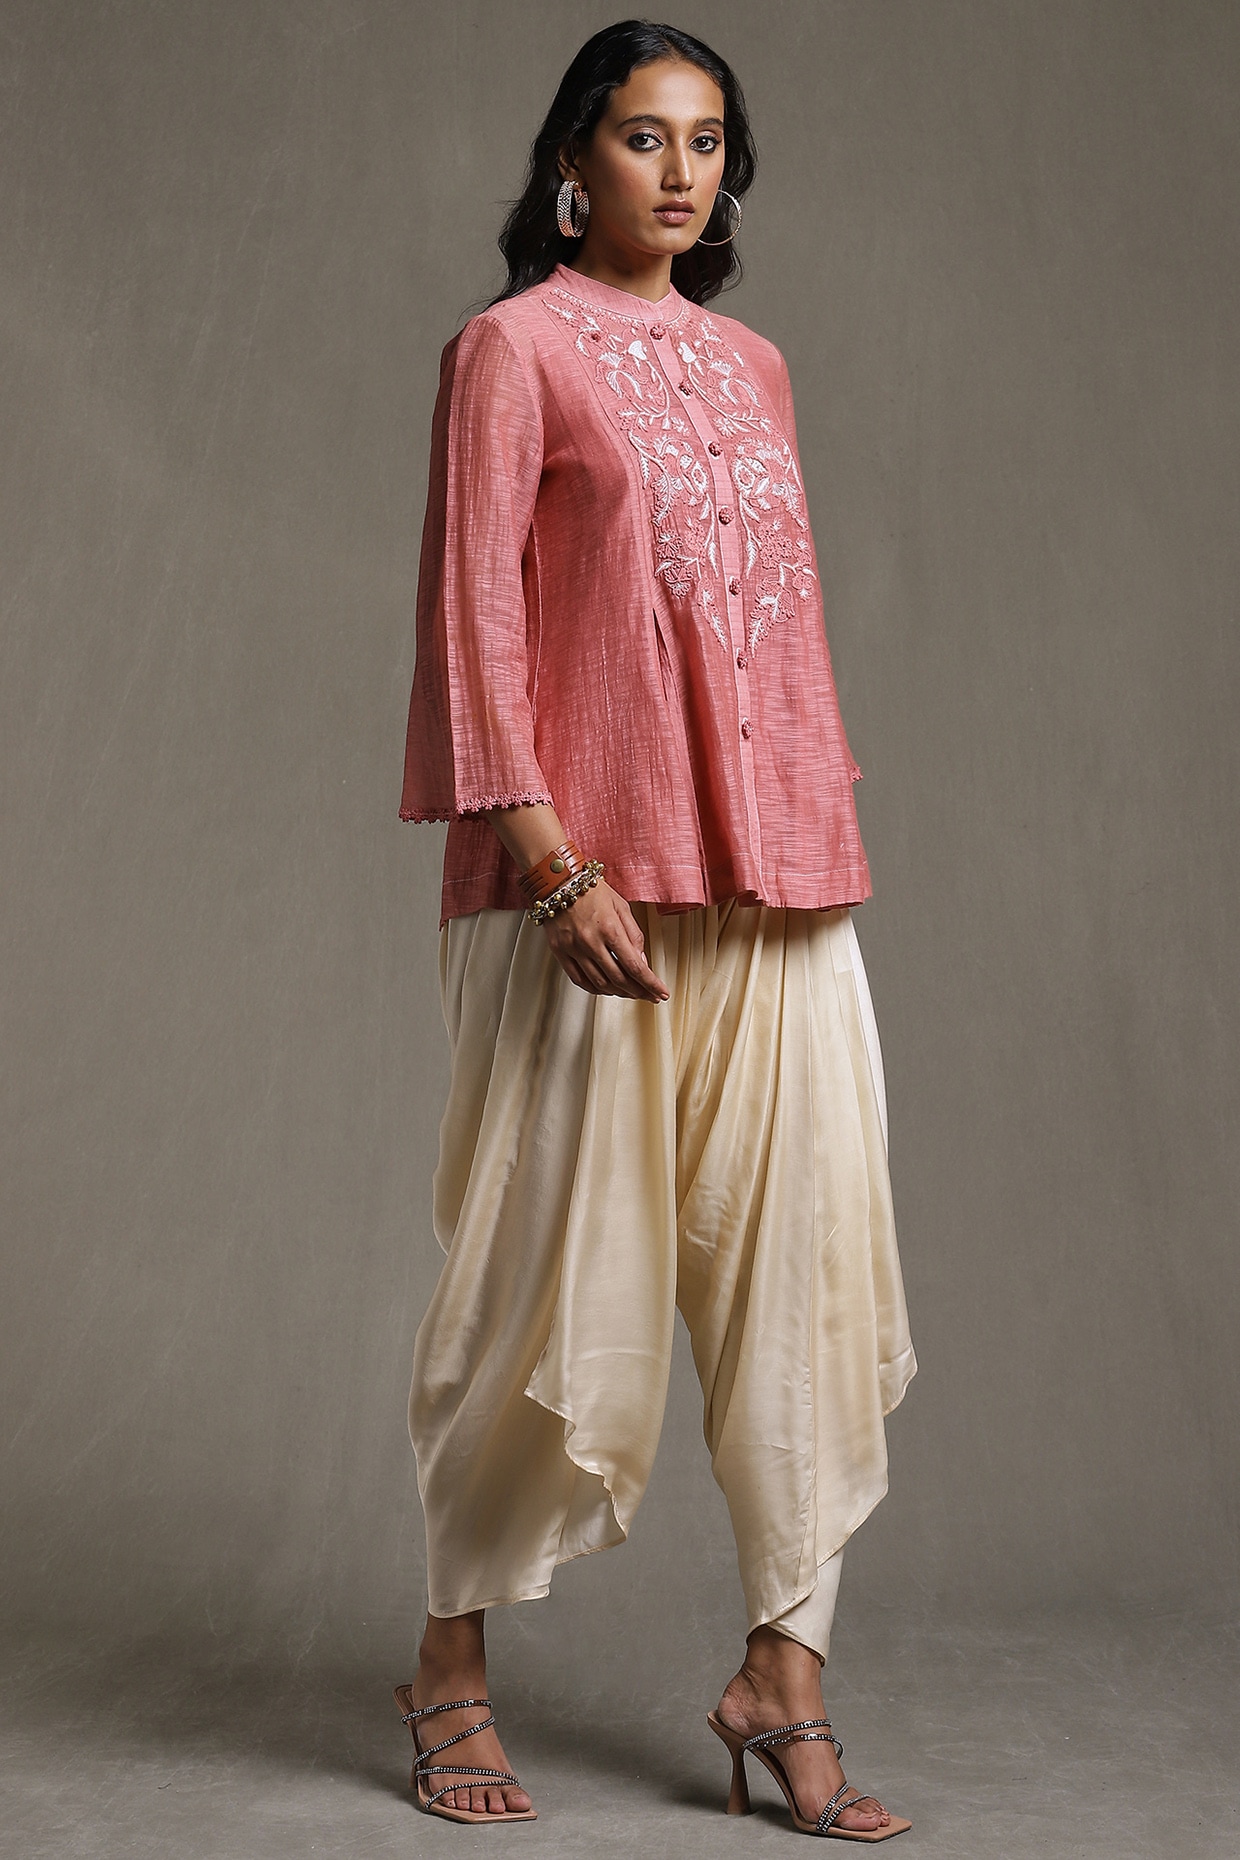 110 Dhoti pants ideas  indian designer wear indian outfits indian fashion